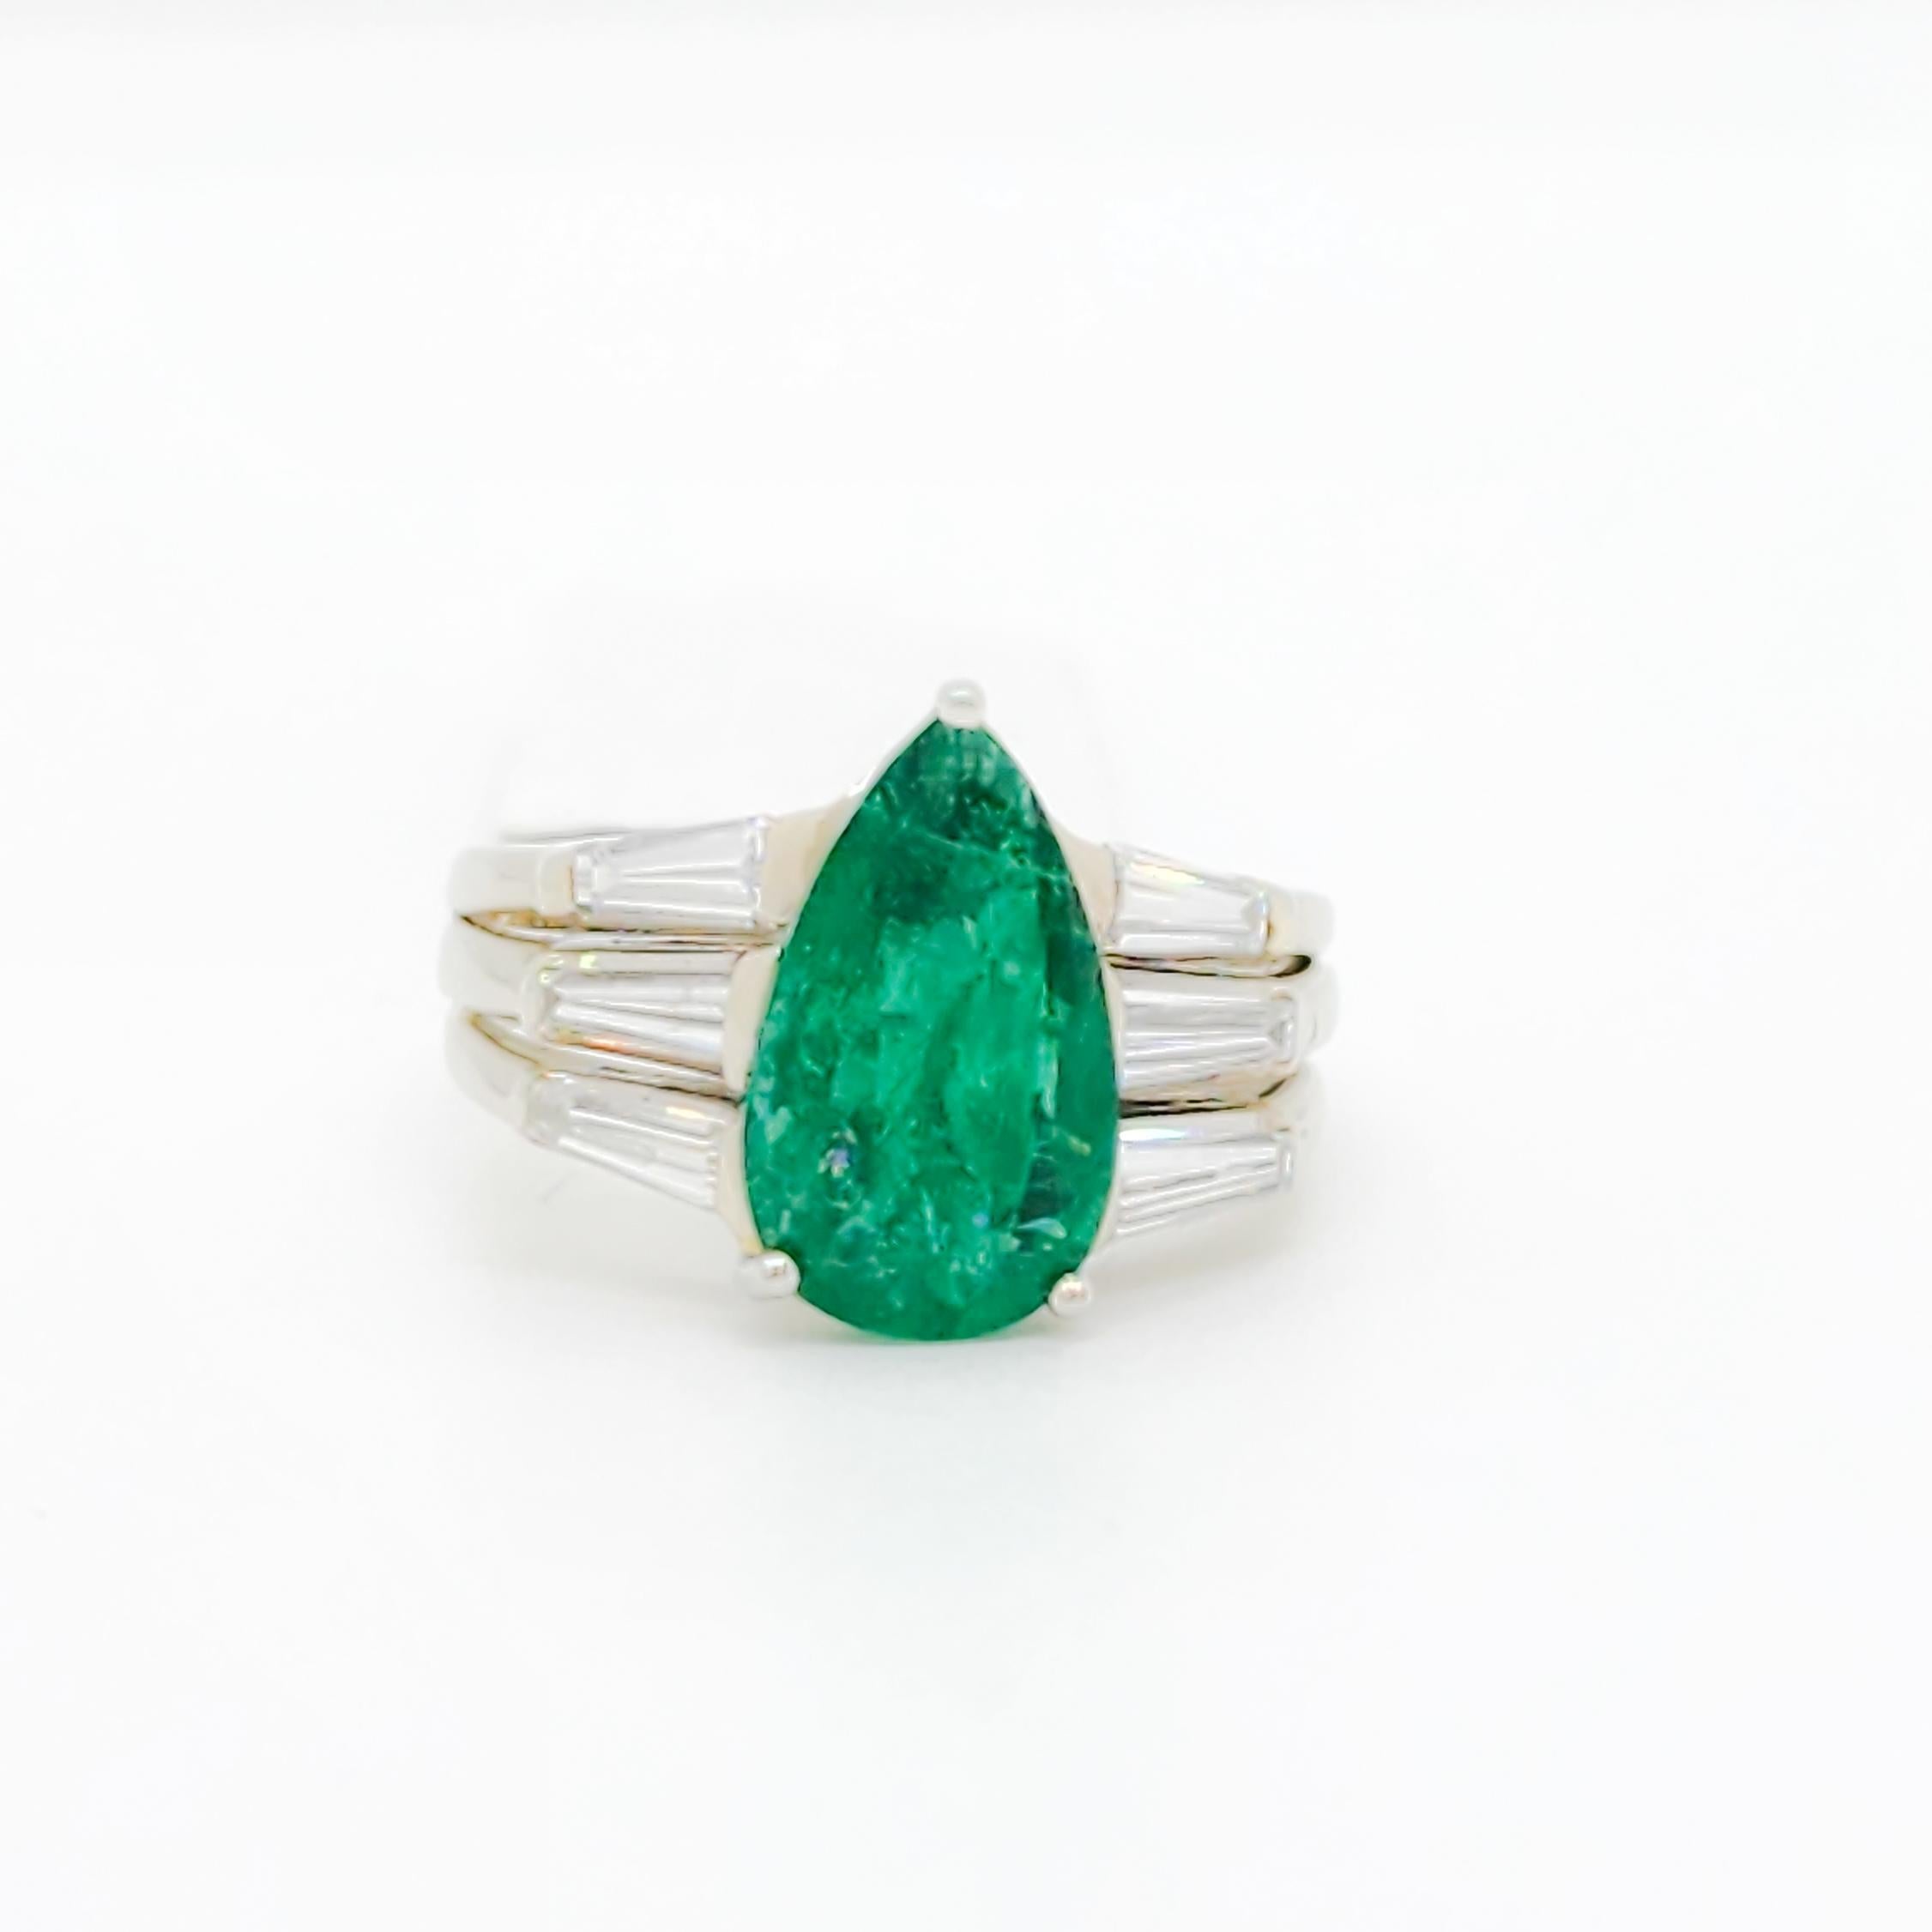 Beautiful 3.22 ct. emerald pear shape with 1.00 ct. good quality, white, and bright diamond baguettes.  Handmade in 18k white gold.  Ring size 8.